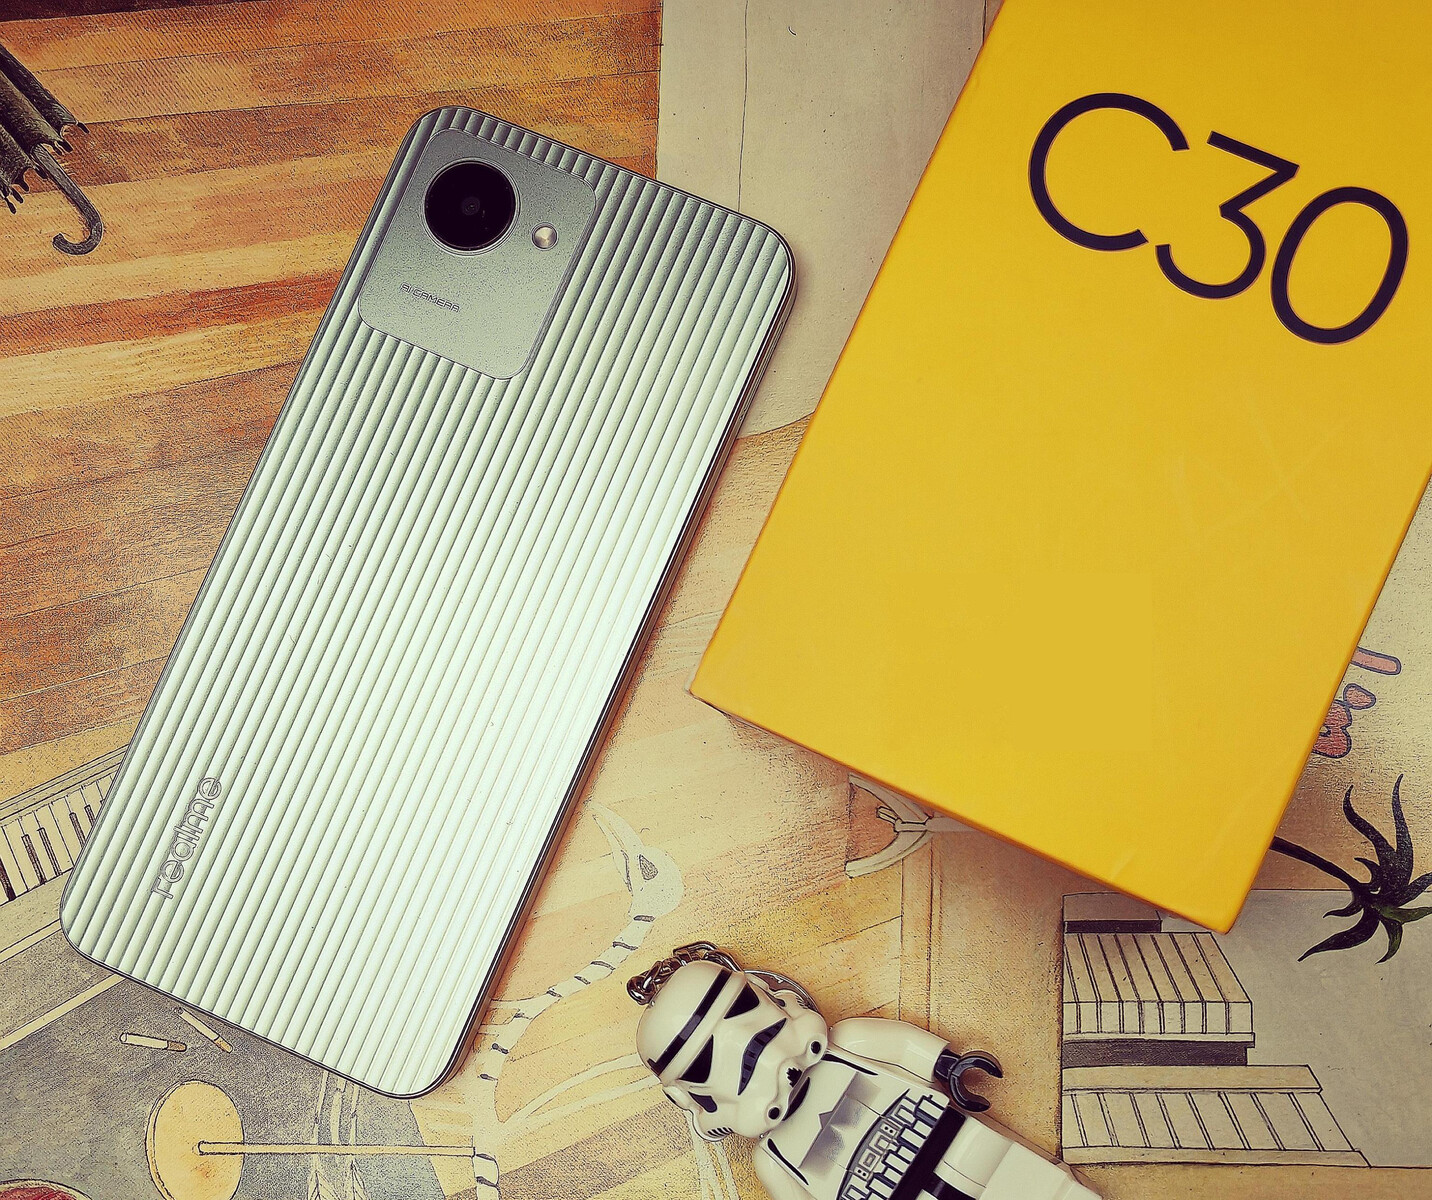 realme C30 smartphone review - Fast storage and plenty of stripes